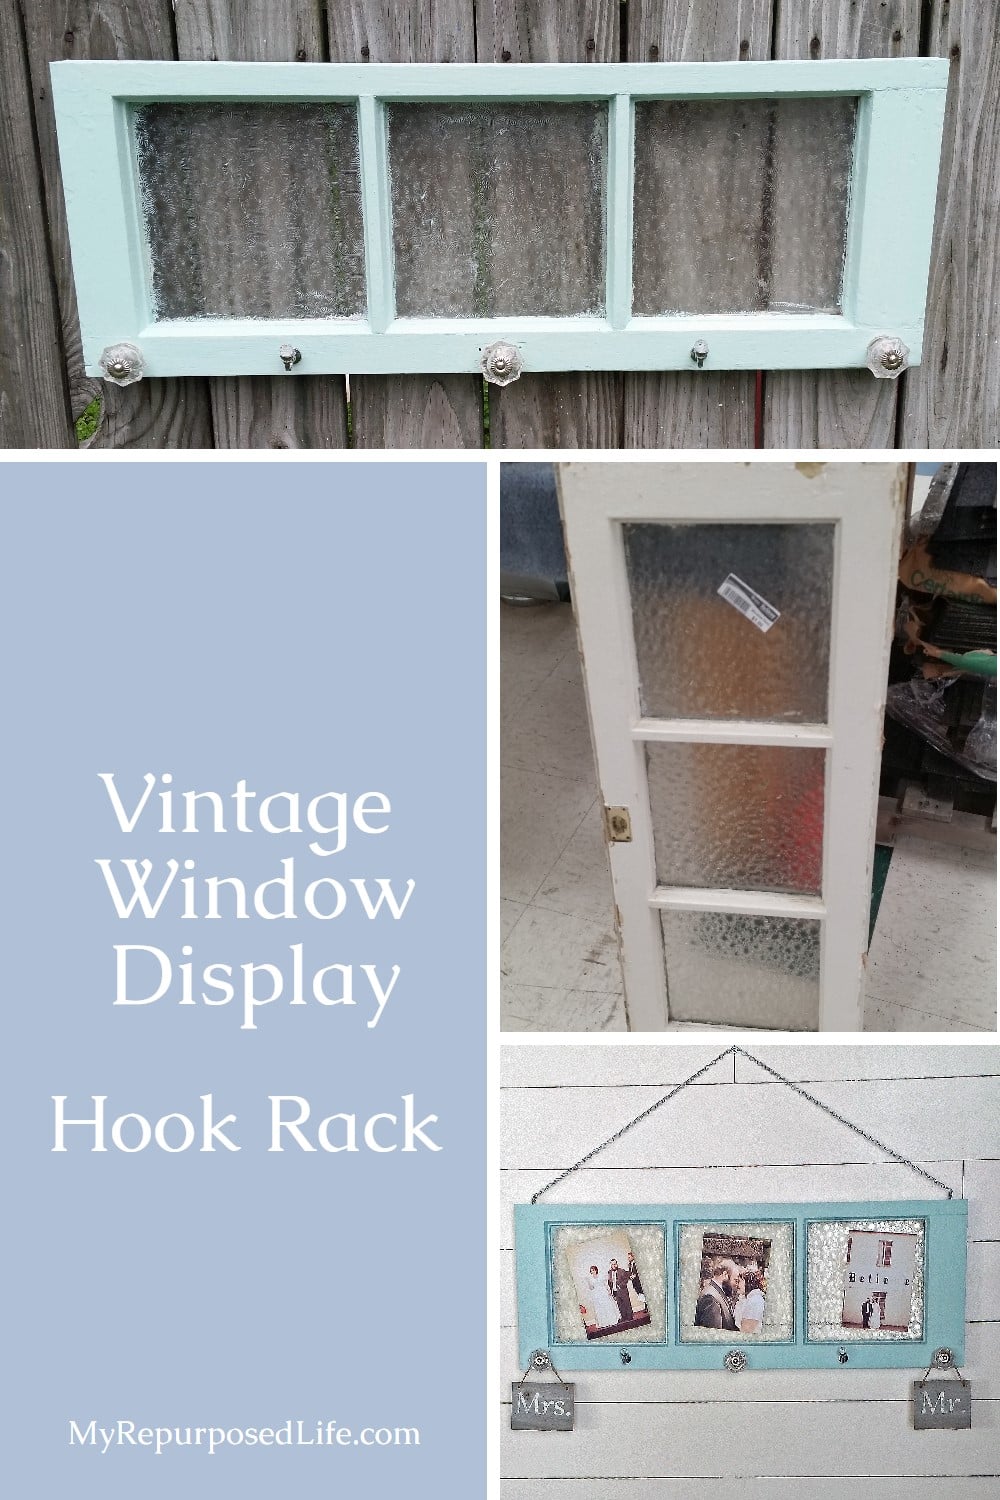 How to turn a vintage frosted bathroom window into a unique and handy coat rack and more. Display photos on the glass and use the hooks for hanging scarves, jewelry and more. #MyRepurposedLife #upcycle #window #wedding #jewelry #scarf #organization via @repurposedlife